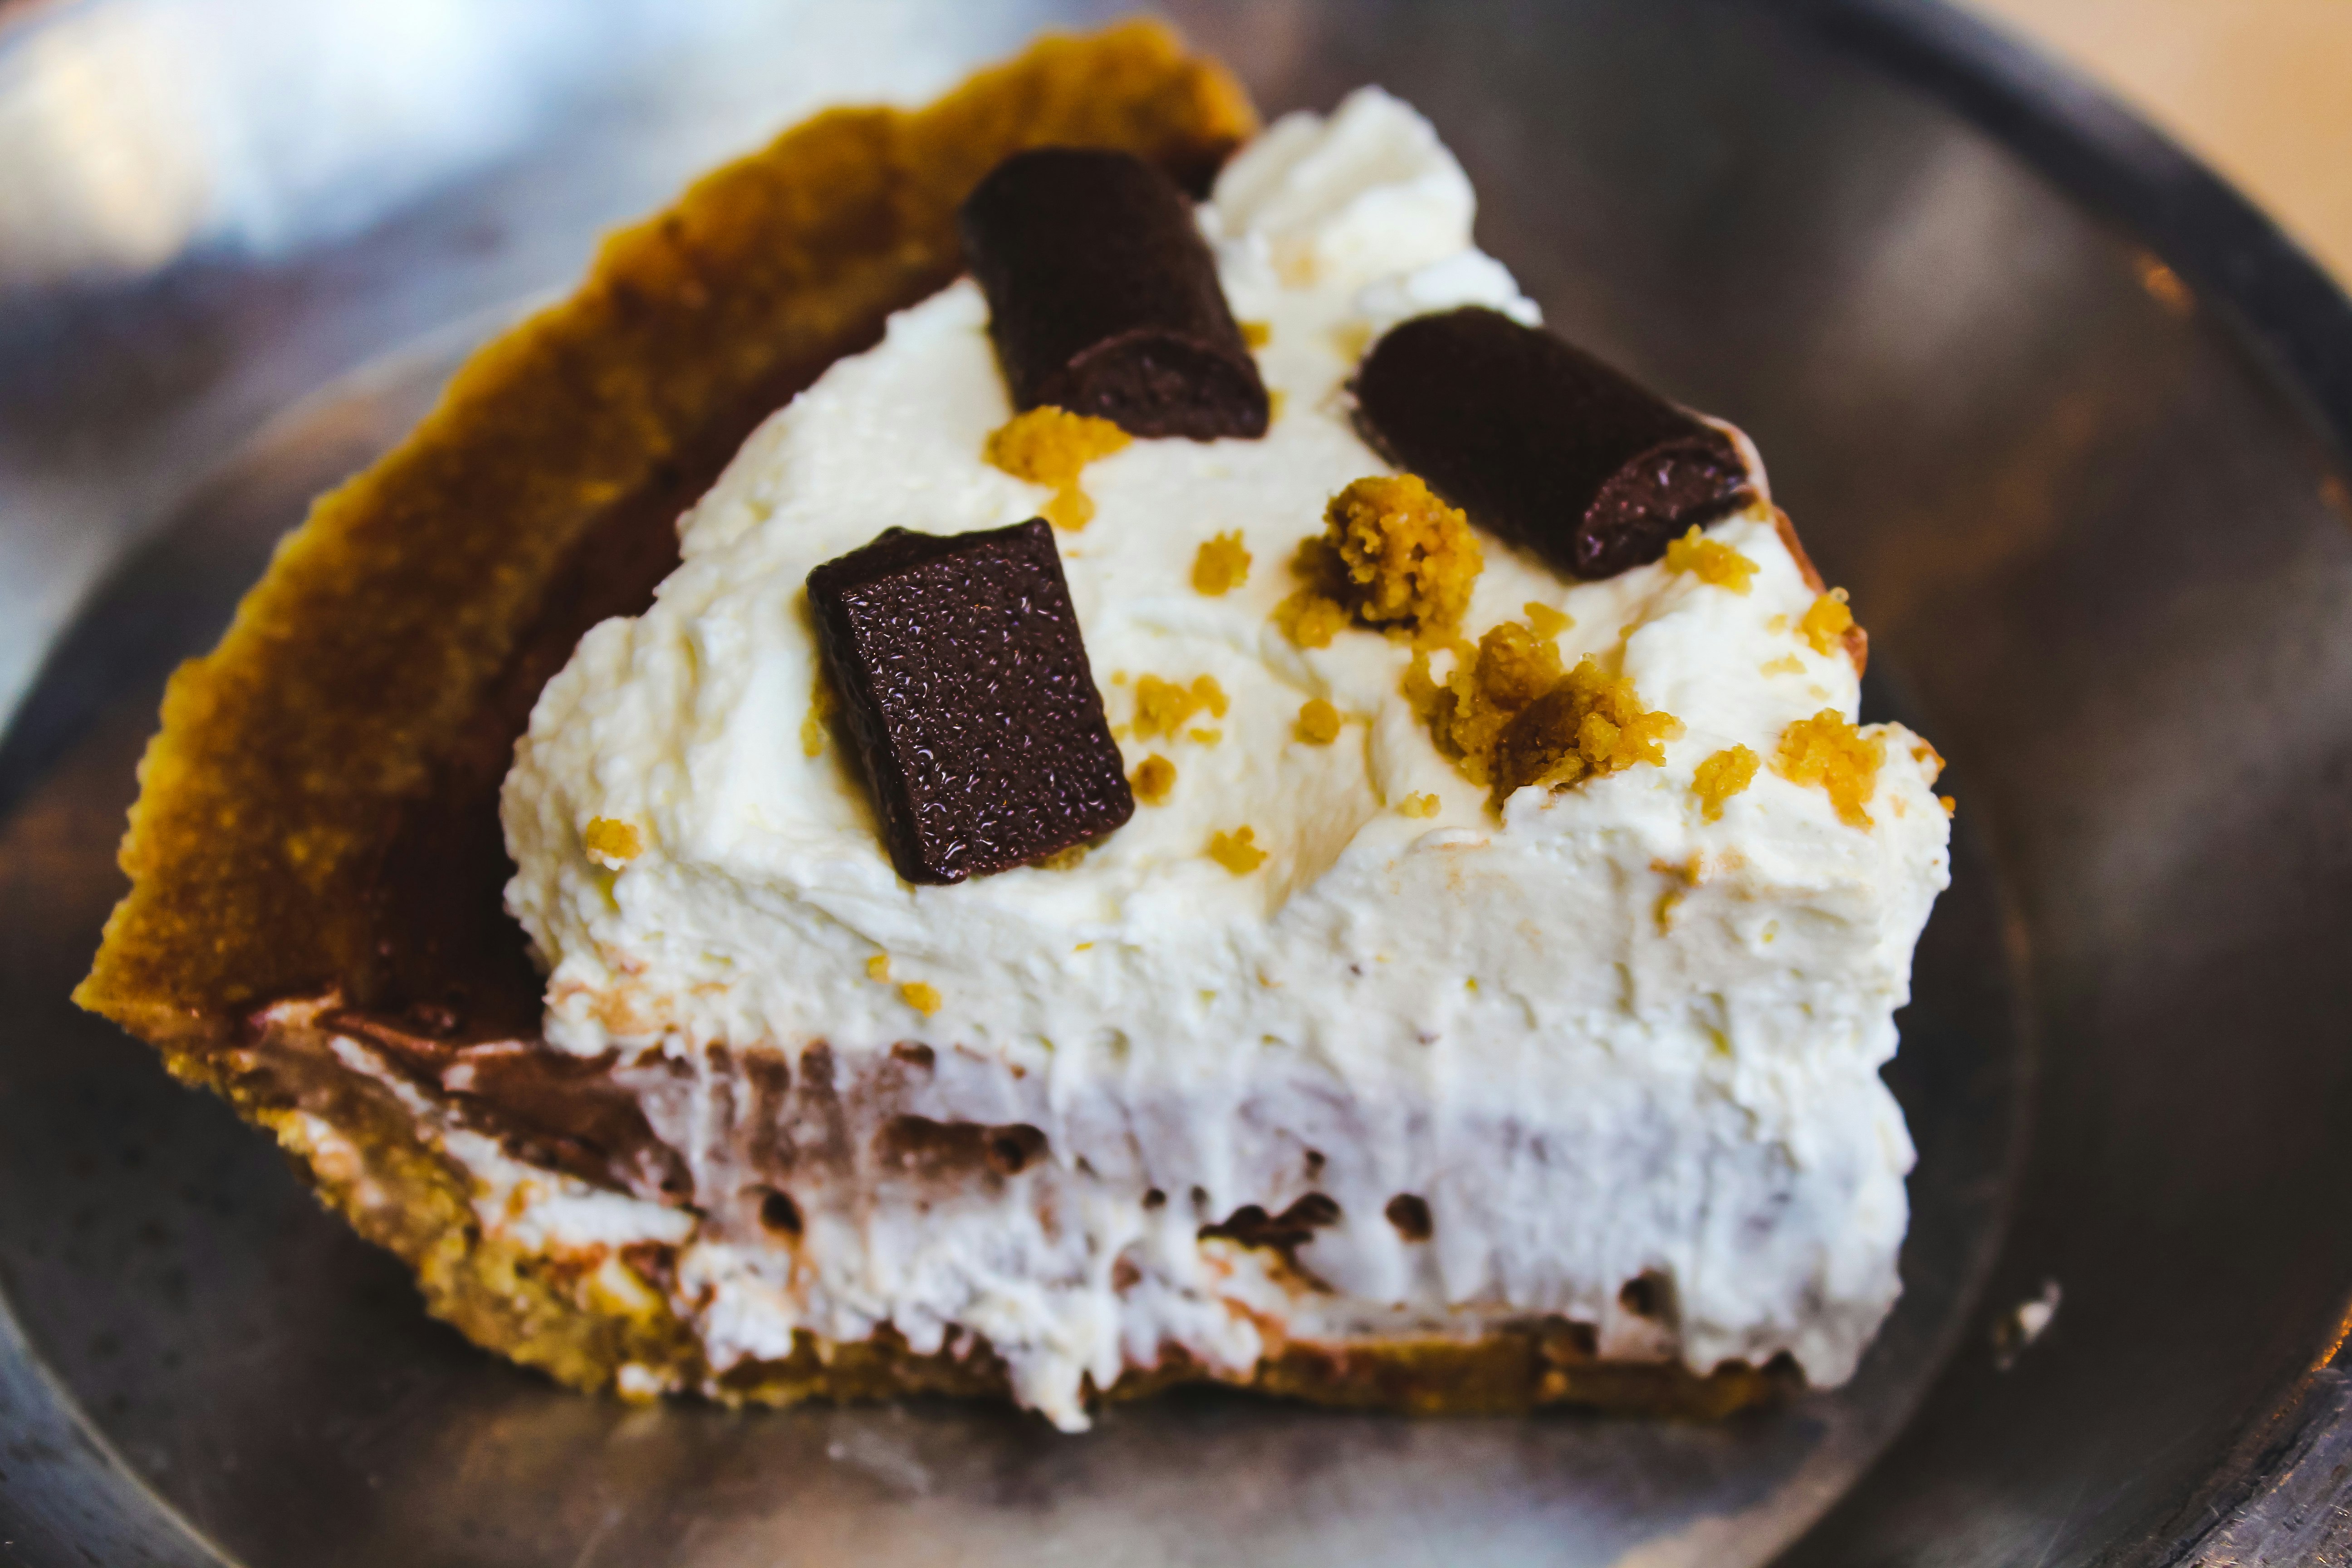 S'more pie at the Pie Hole